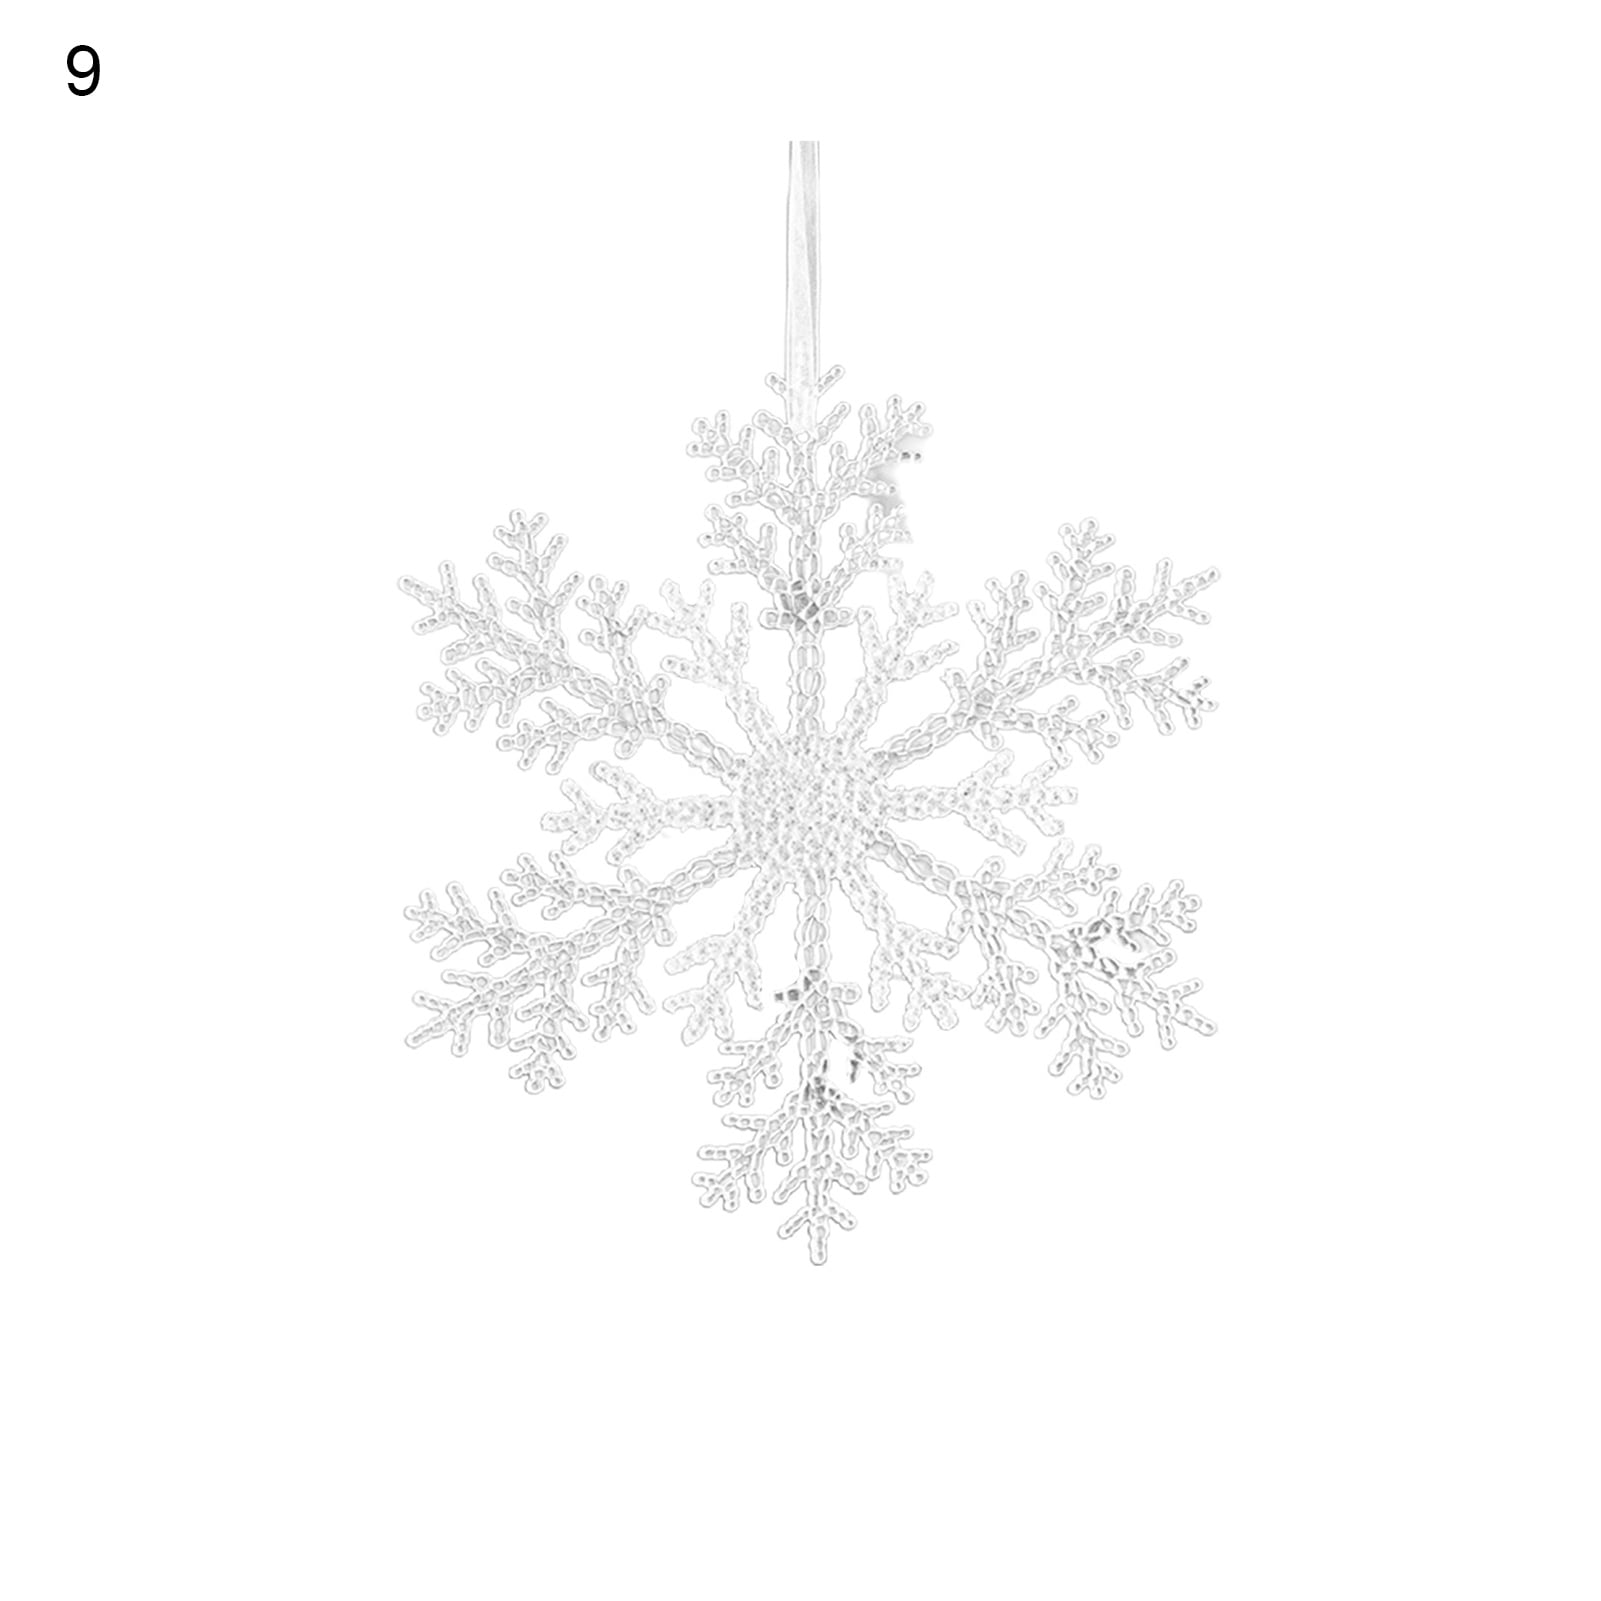  Kwan Crafts Christmas Snowflake Background Clear